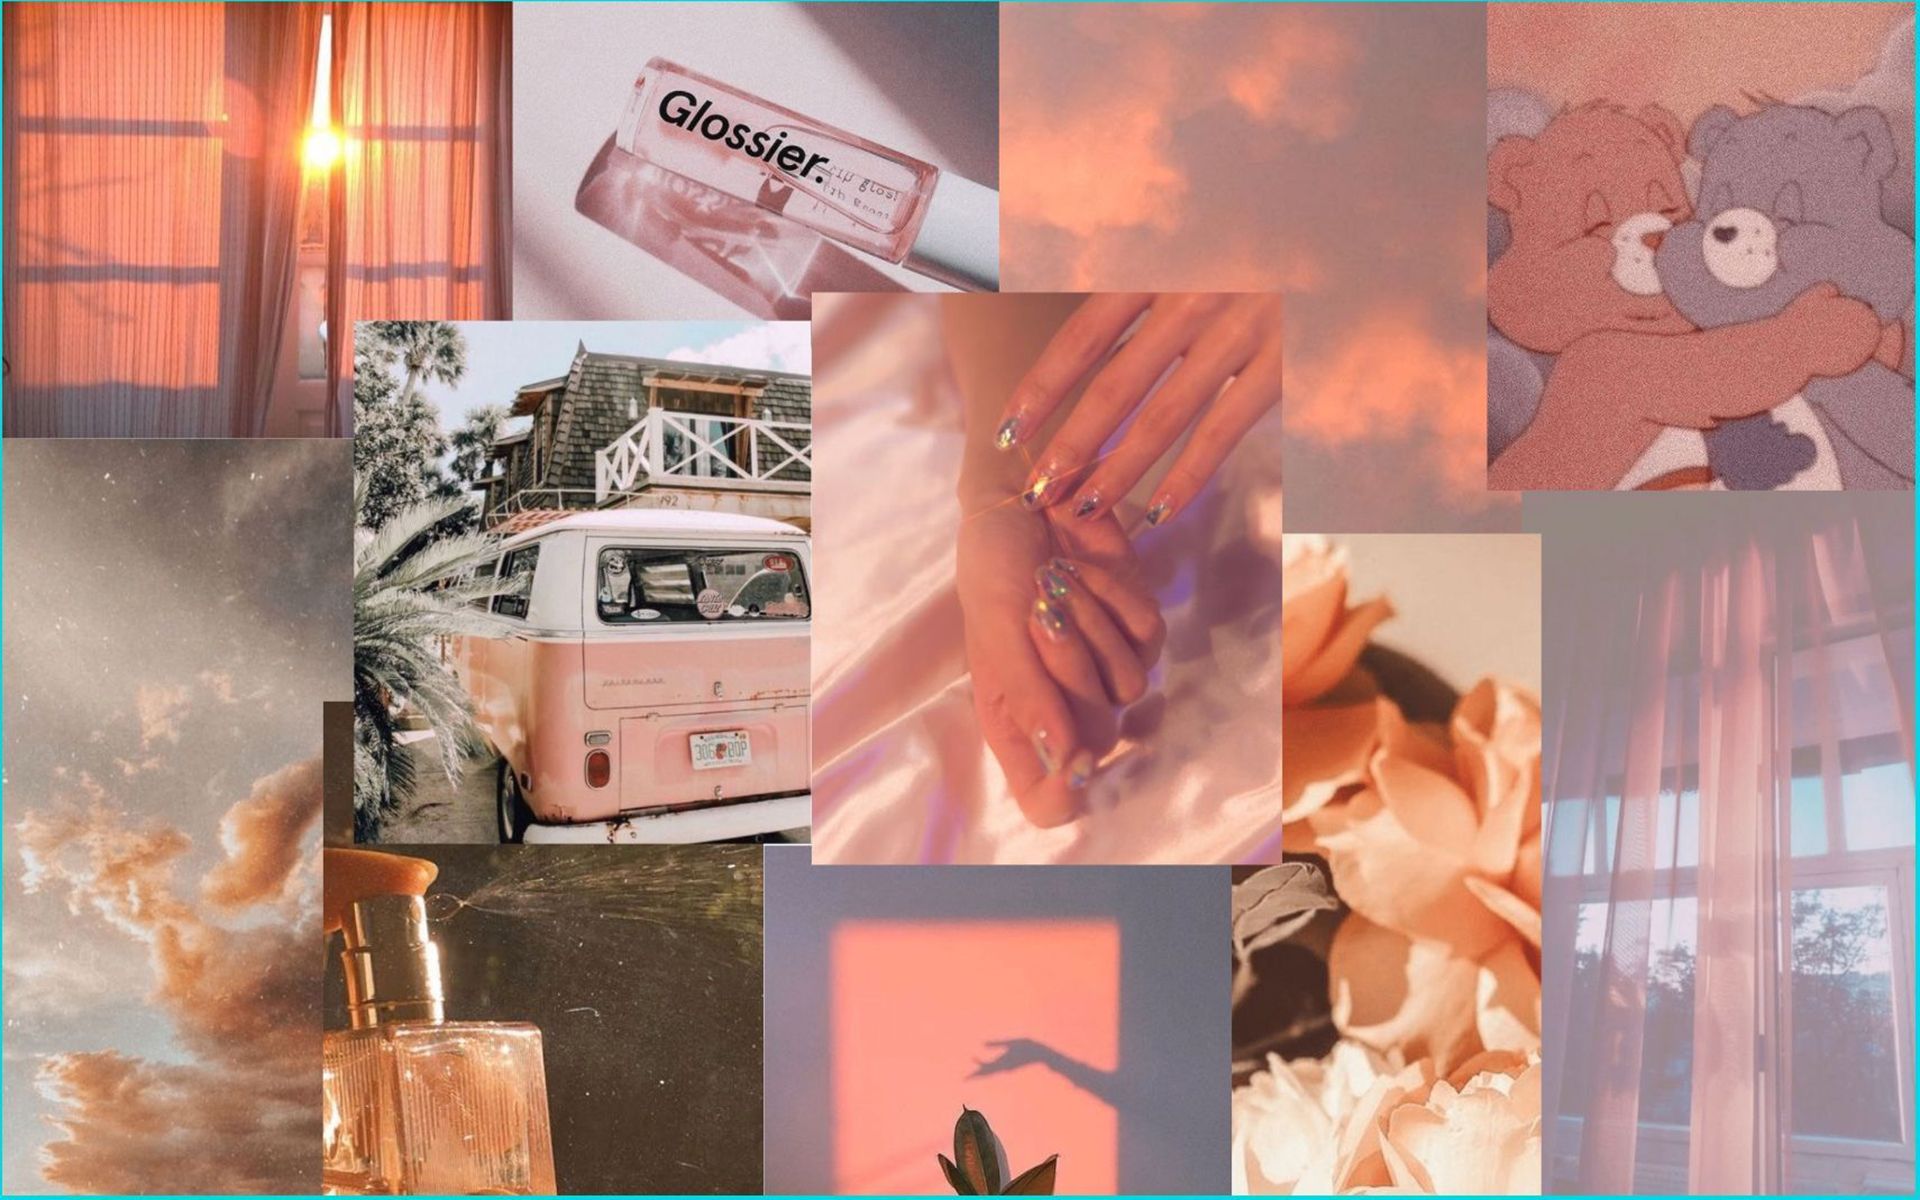 A collage of images including a van, a teddy bear, and a pink box of Glossier. - Peach